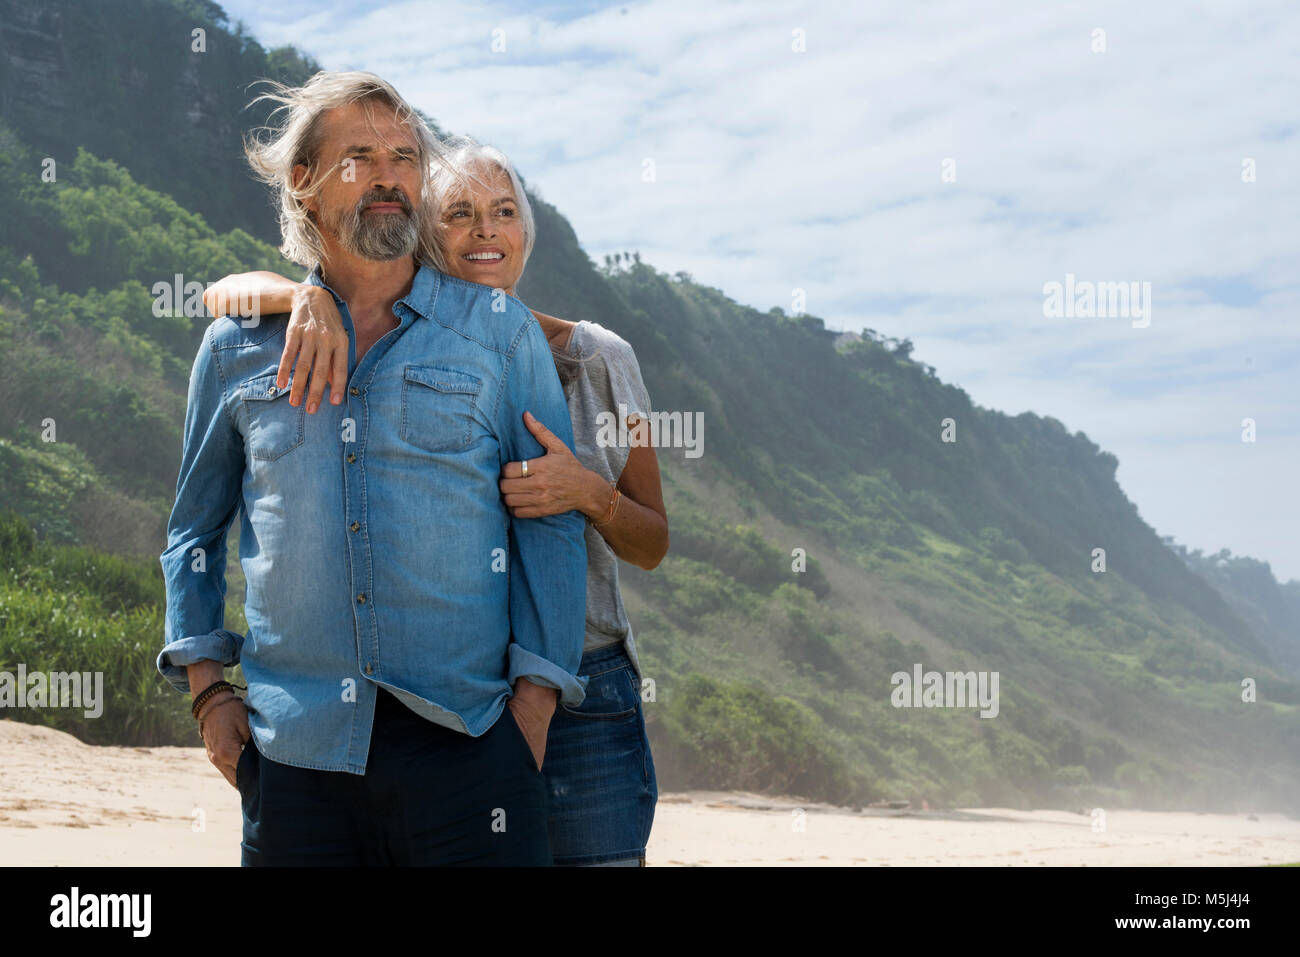 Handsome senior couple embracing at the beach Banque D'Images